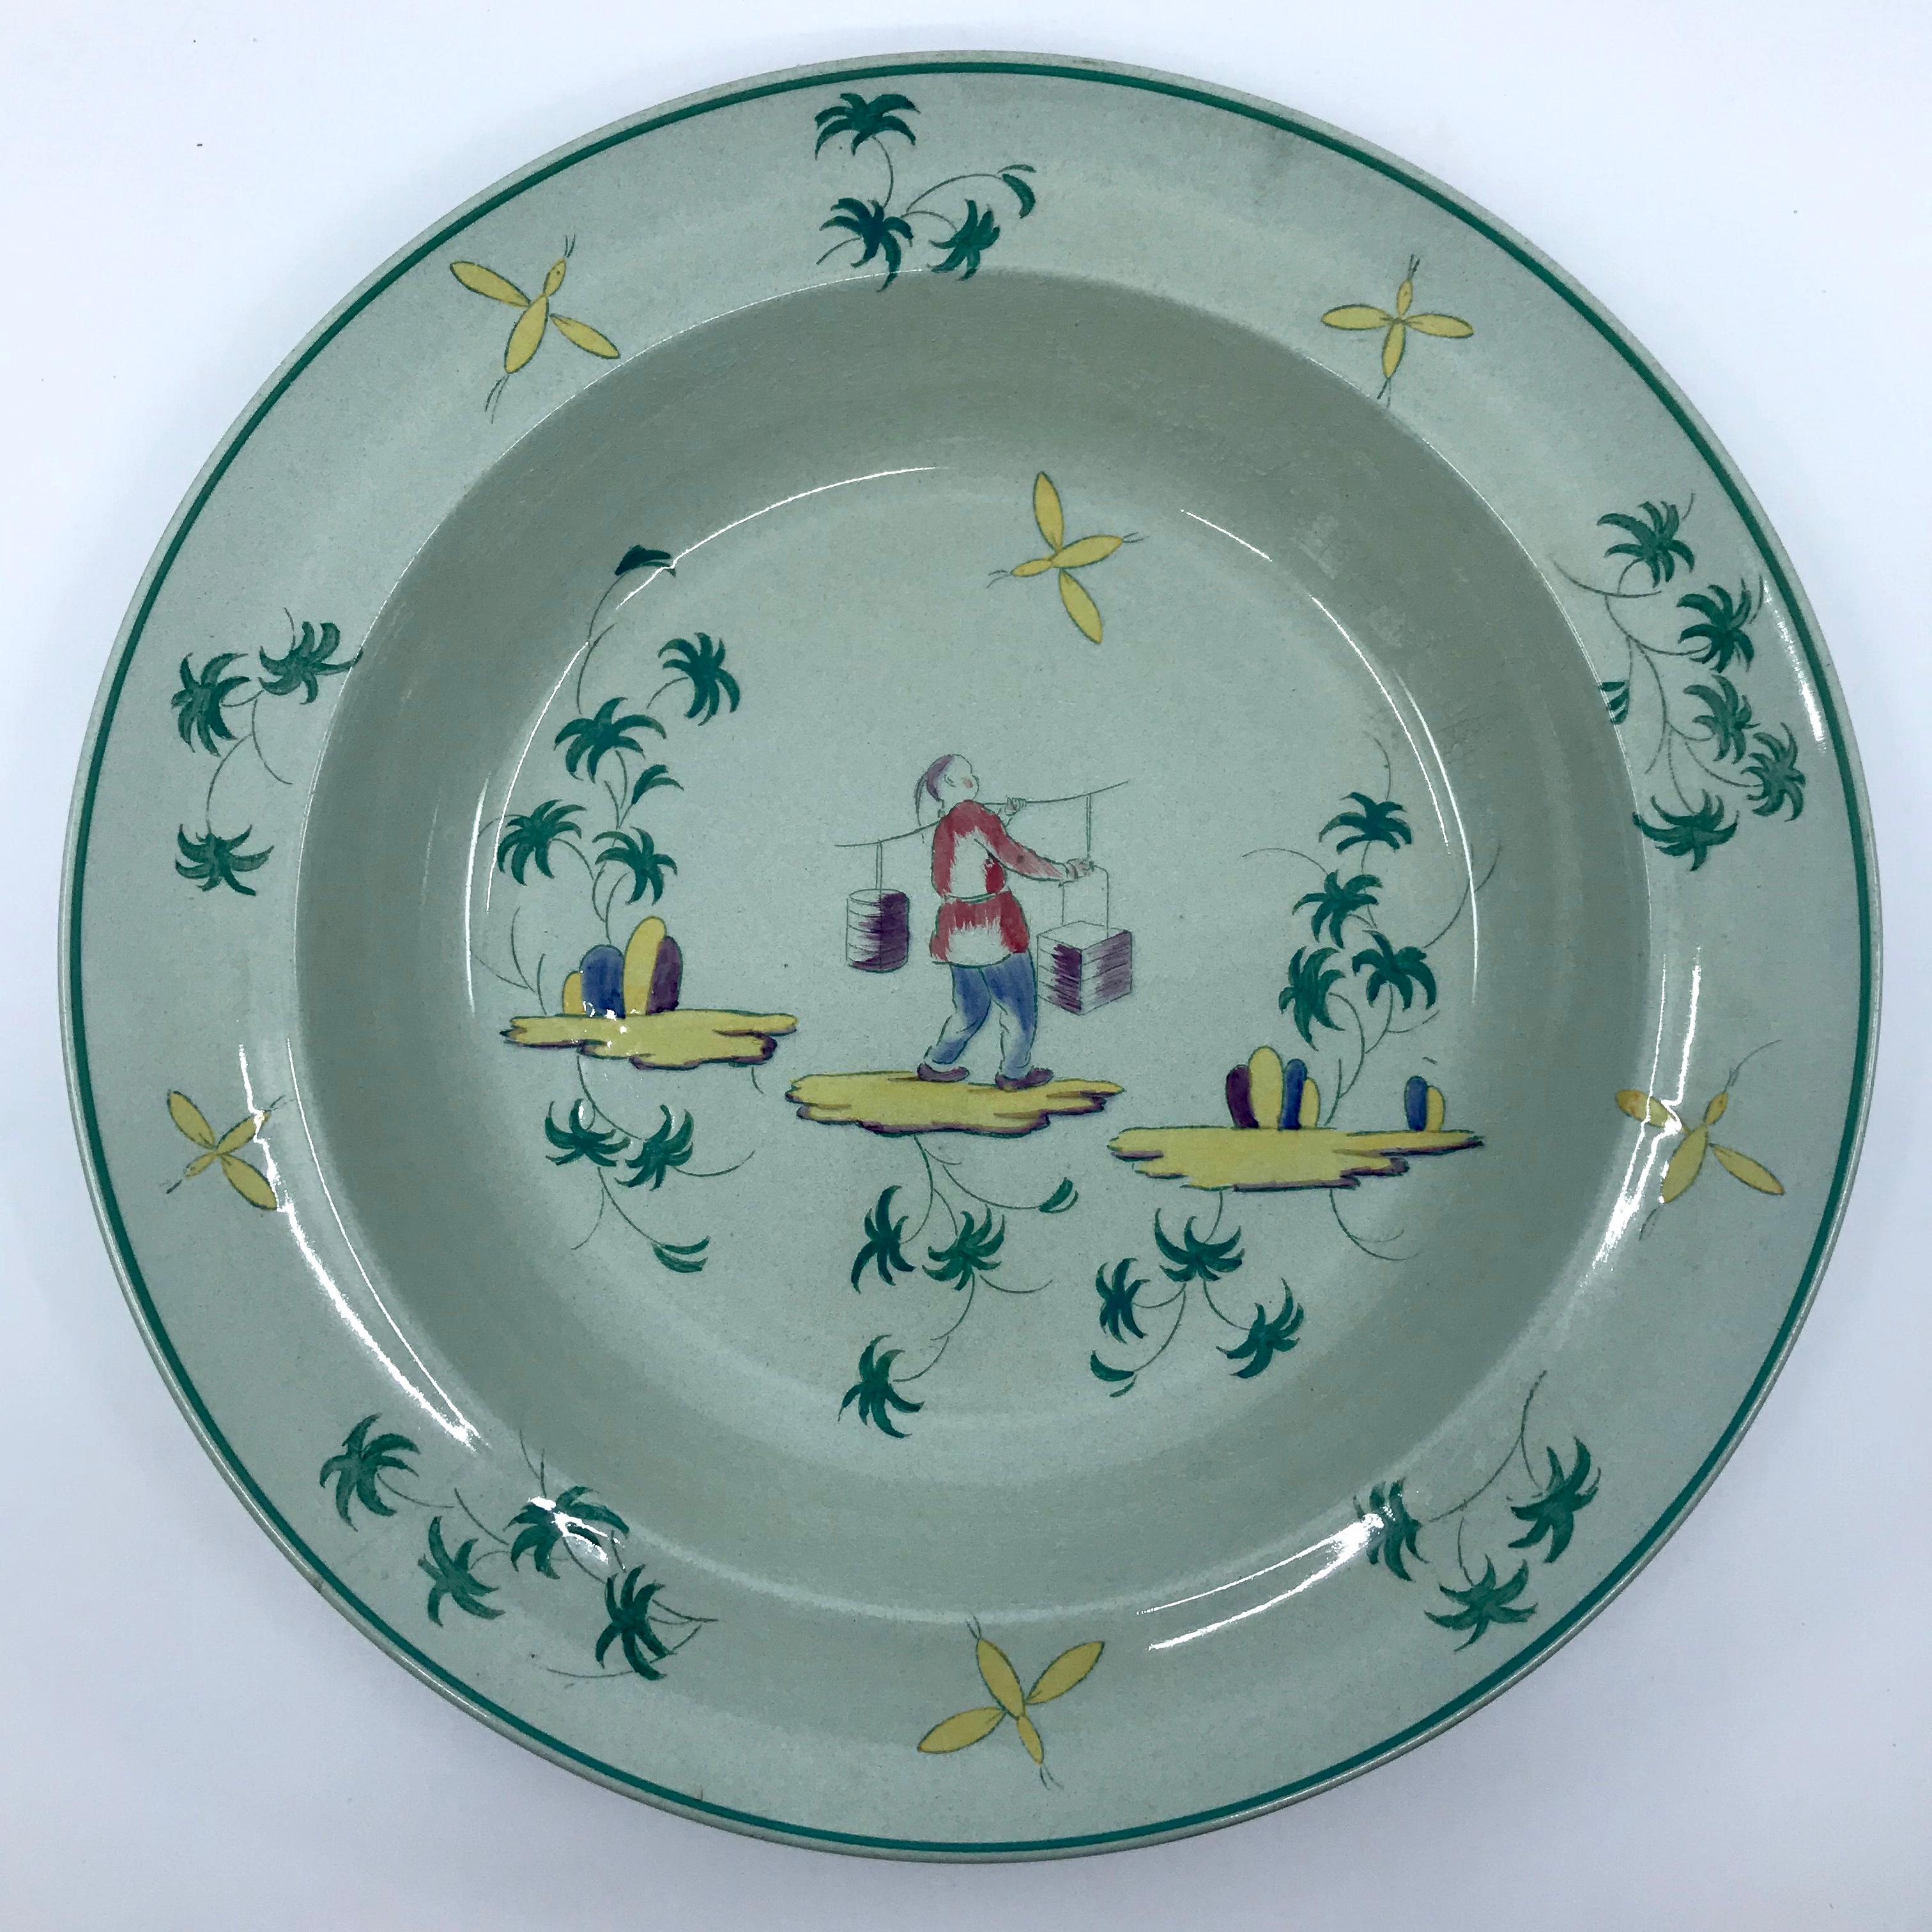 Wedgwood Apprey celadon place-setting plates. Set of three pale celadon pieces for a single place-setting in the rare and charming chinoiserie pattern including a dinner plate, luncheon plate and shallow soup bowl featuring water carriers and a